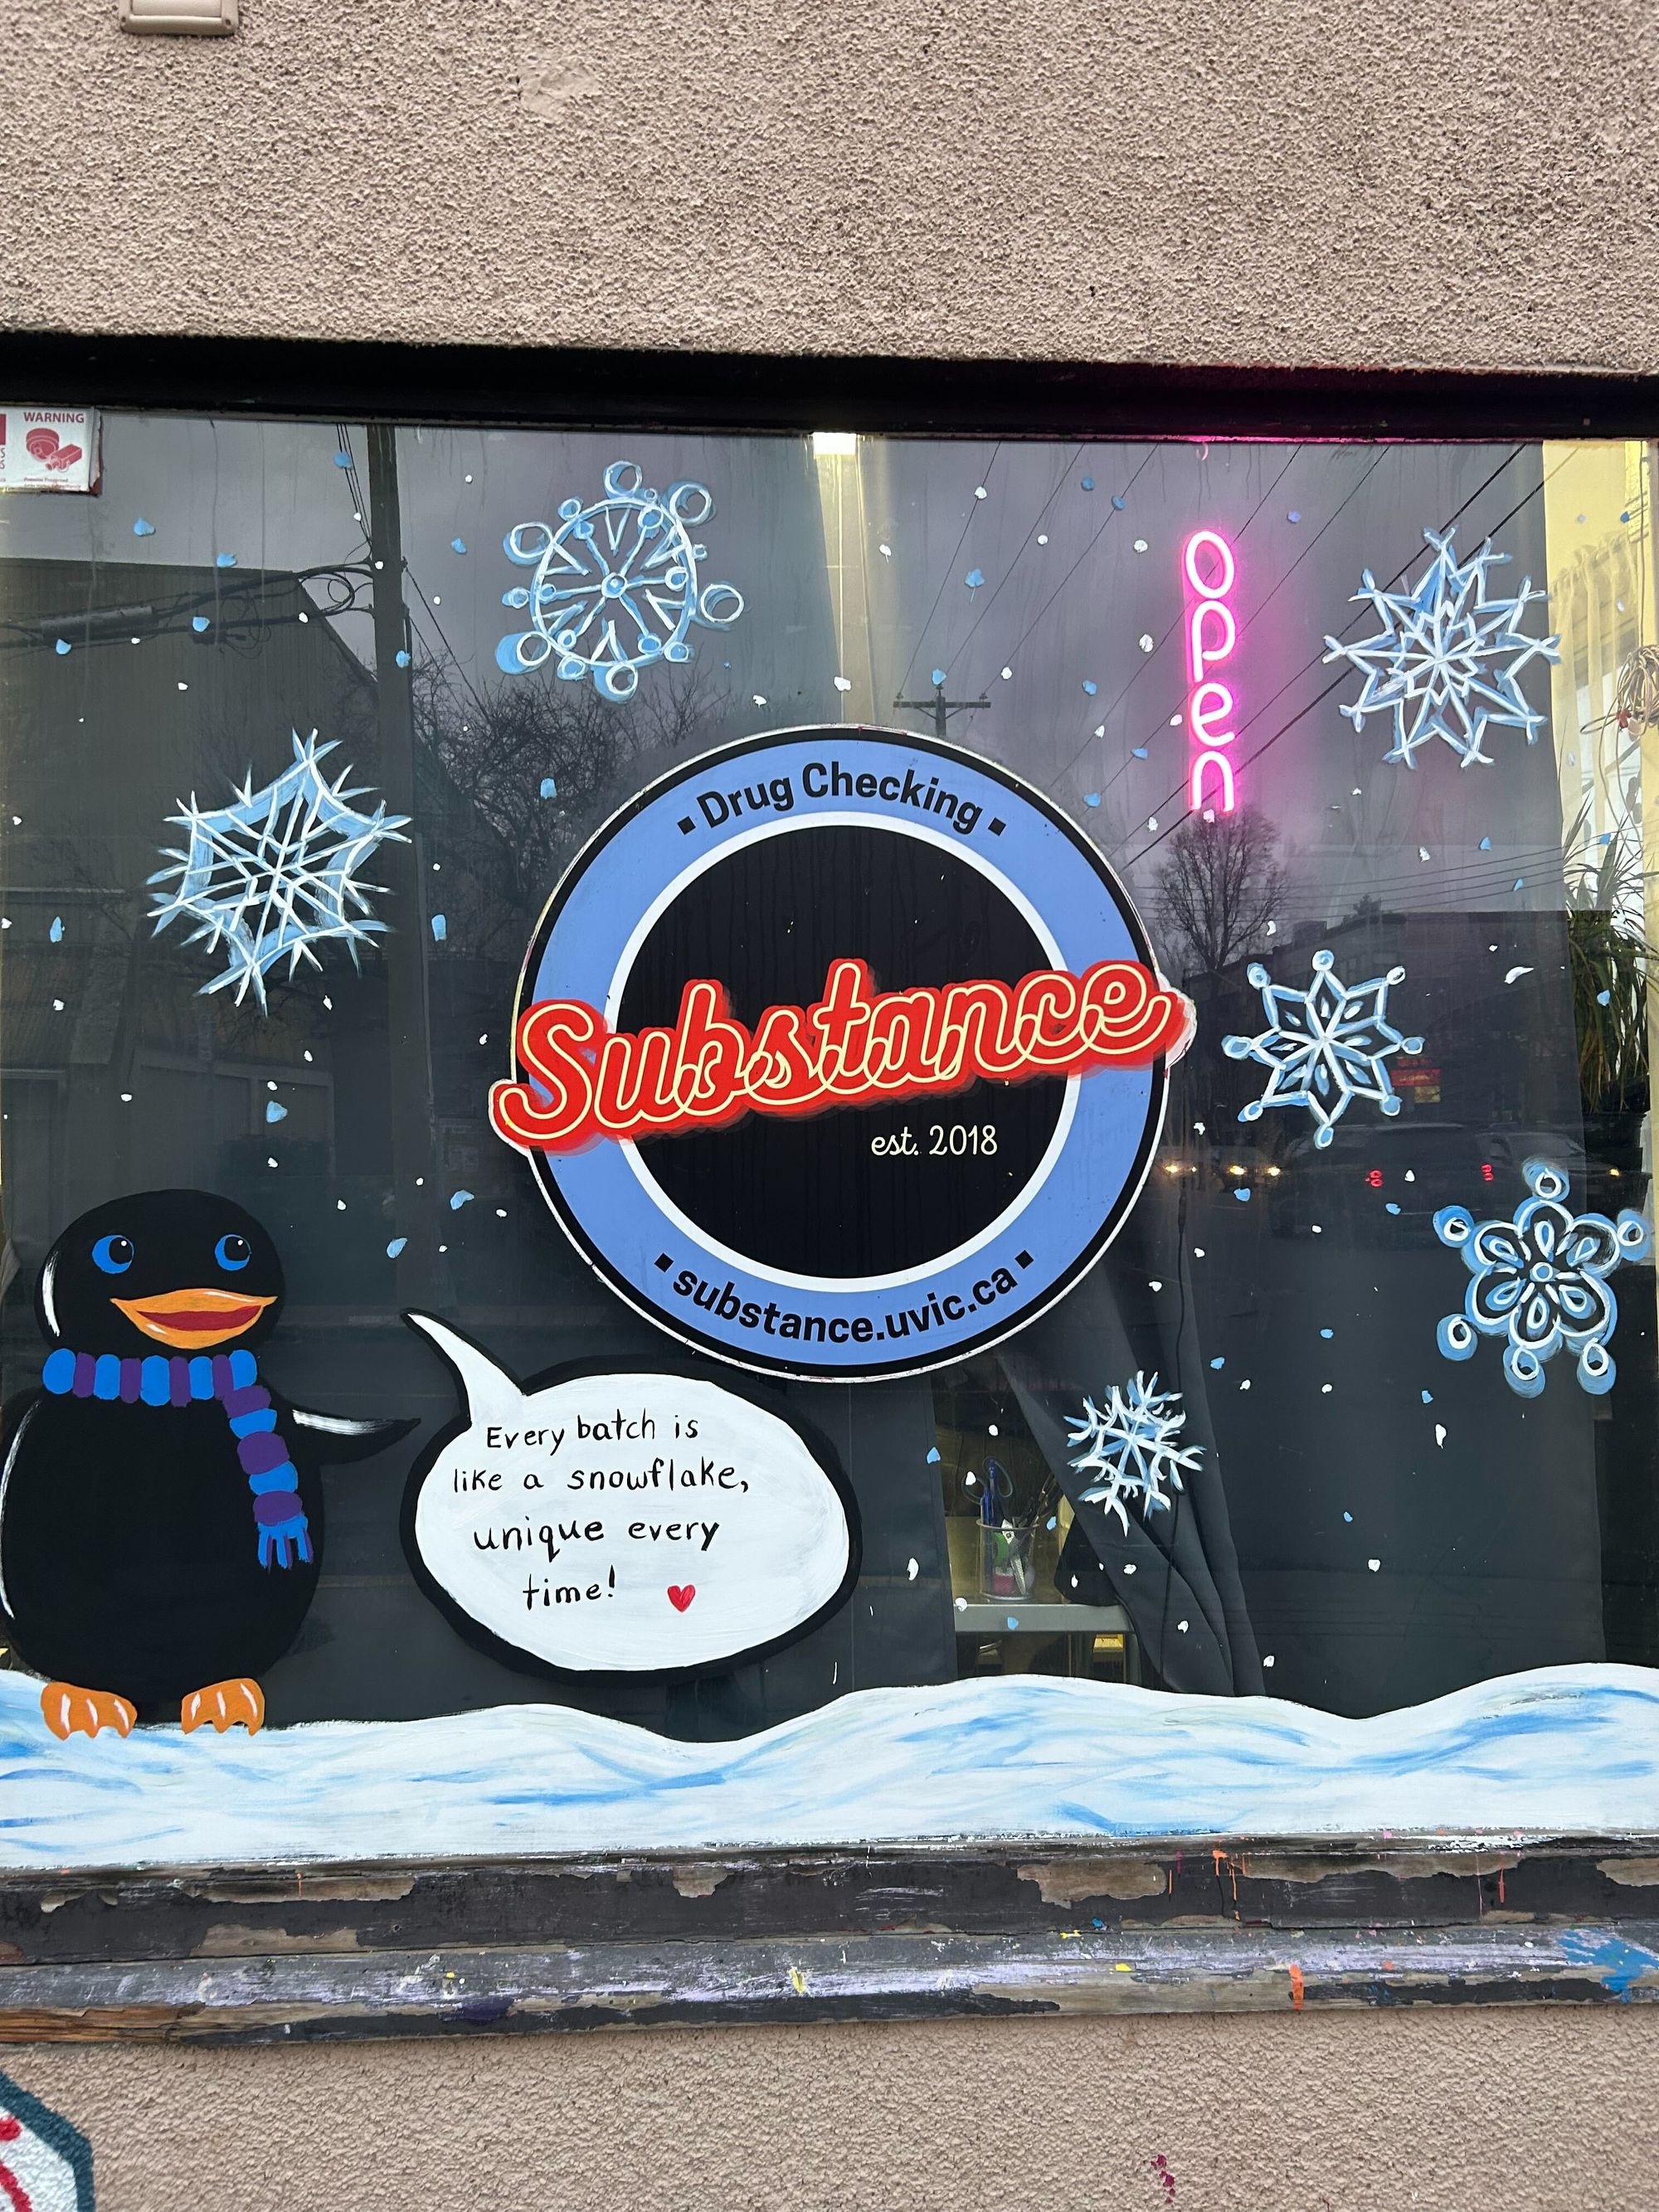 Our new winter mural painted by our talented team member Mo!